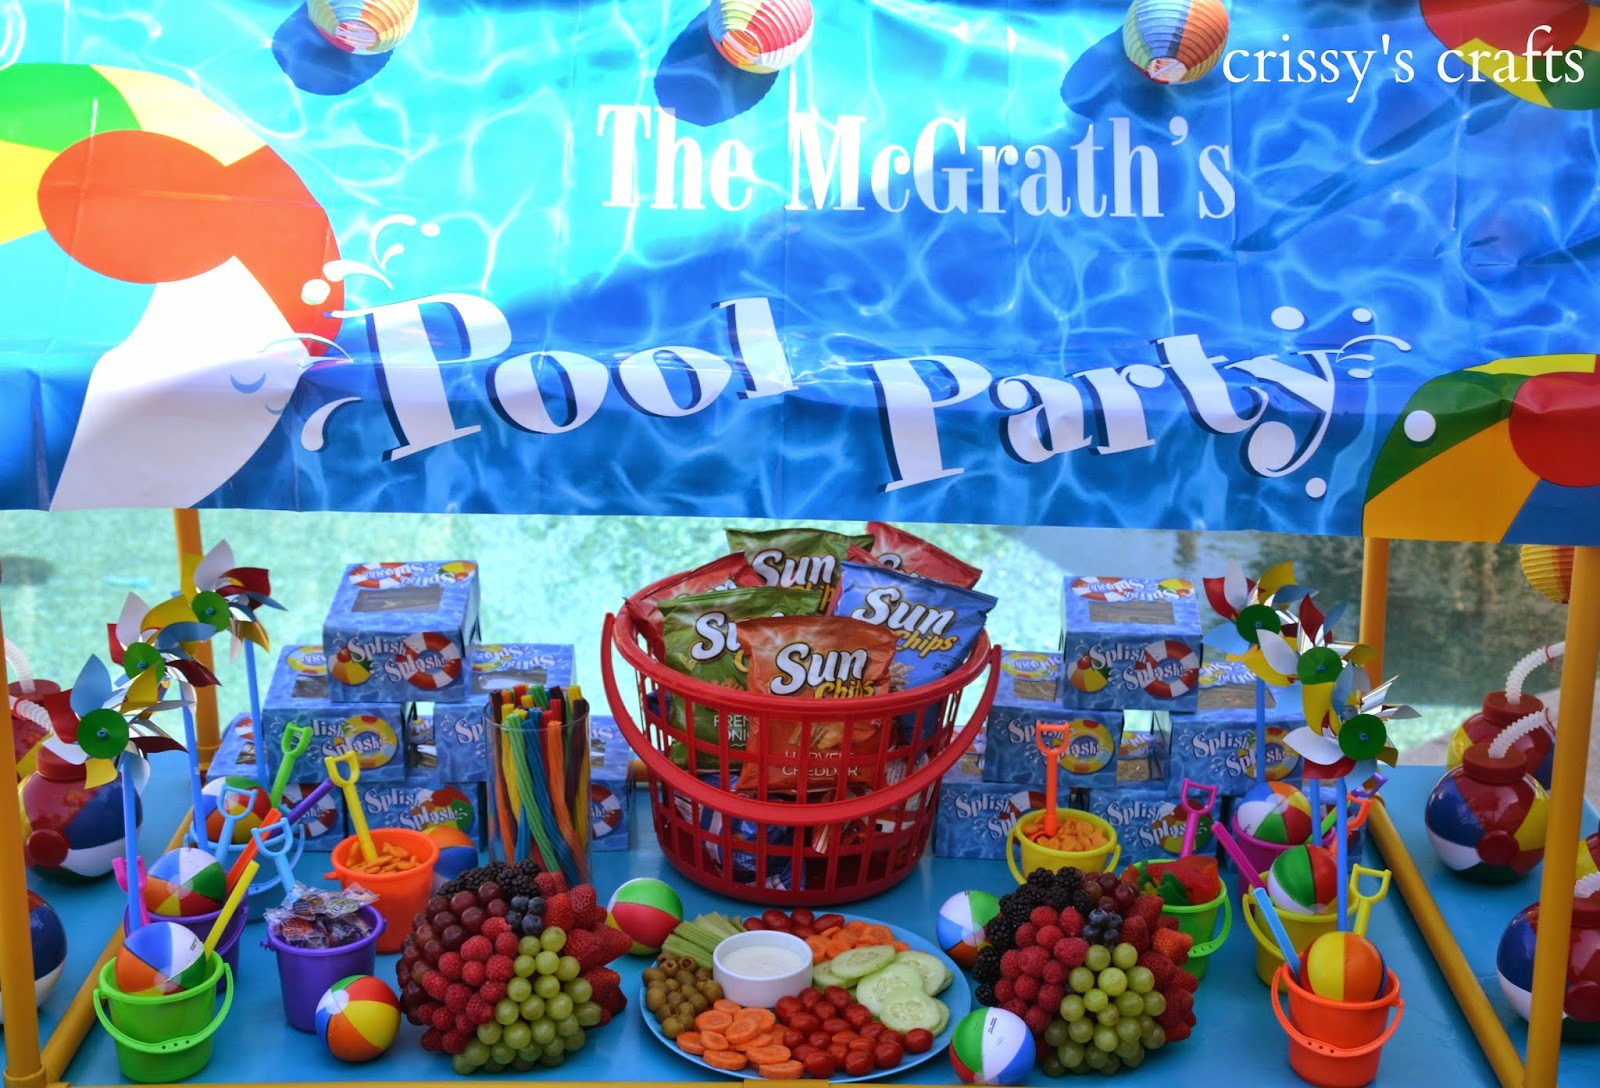 Pool Party Craft Ideas
 Crissy s Crafts Pool Party Summer 2014